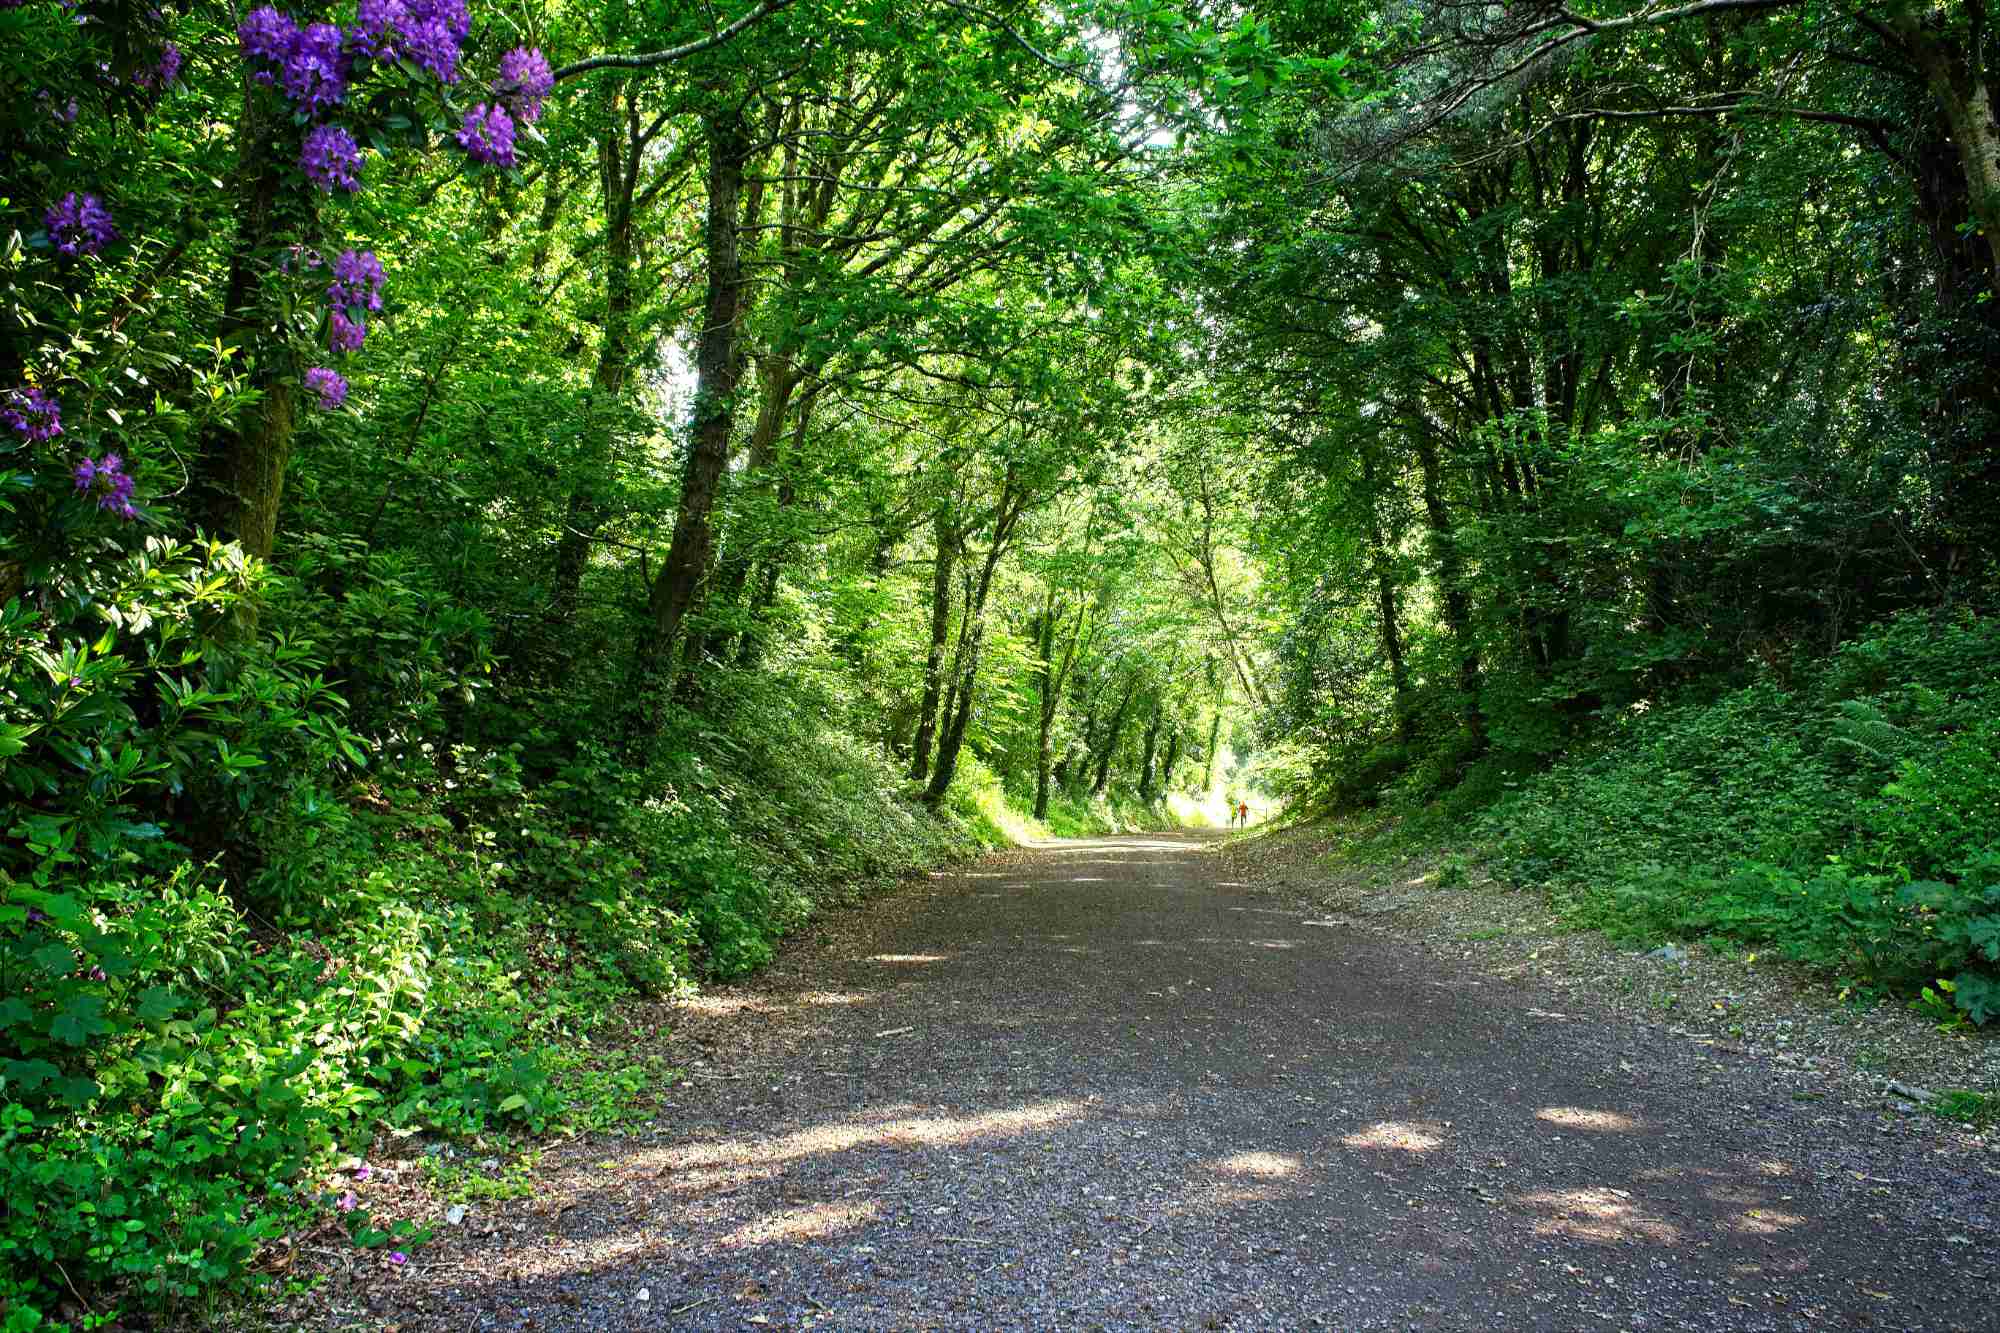 This old railway track is now used as a cycle and walking path, near Bodmin, Cornwall, England, UK.